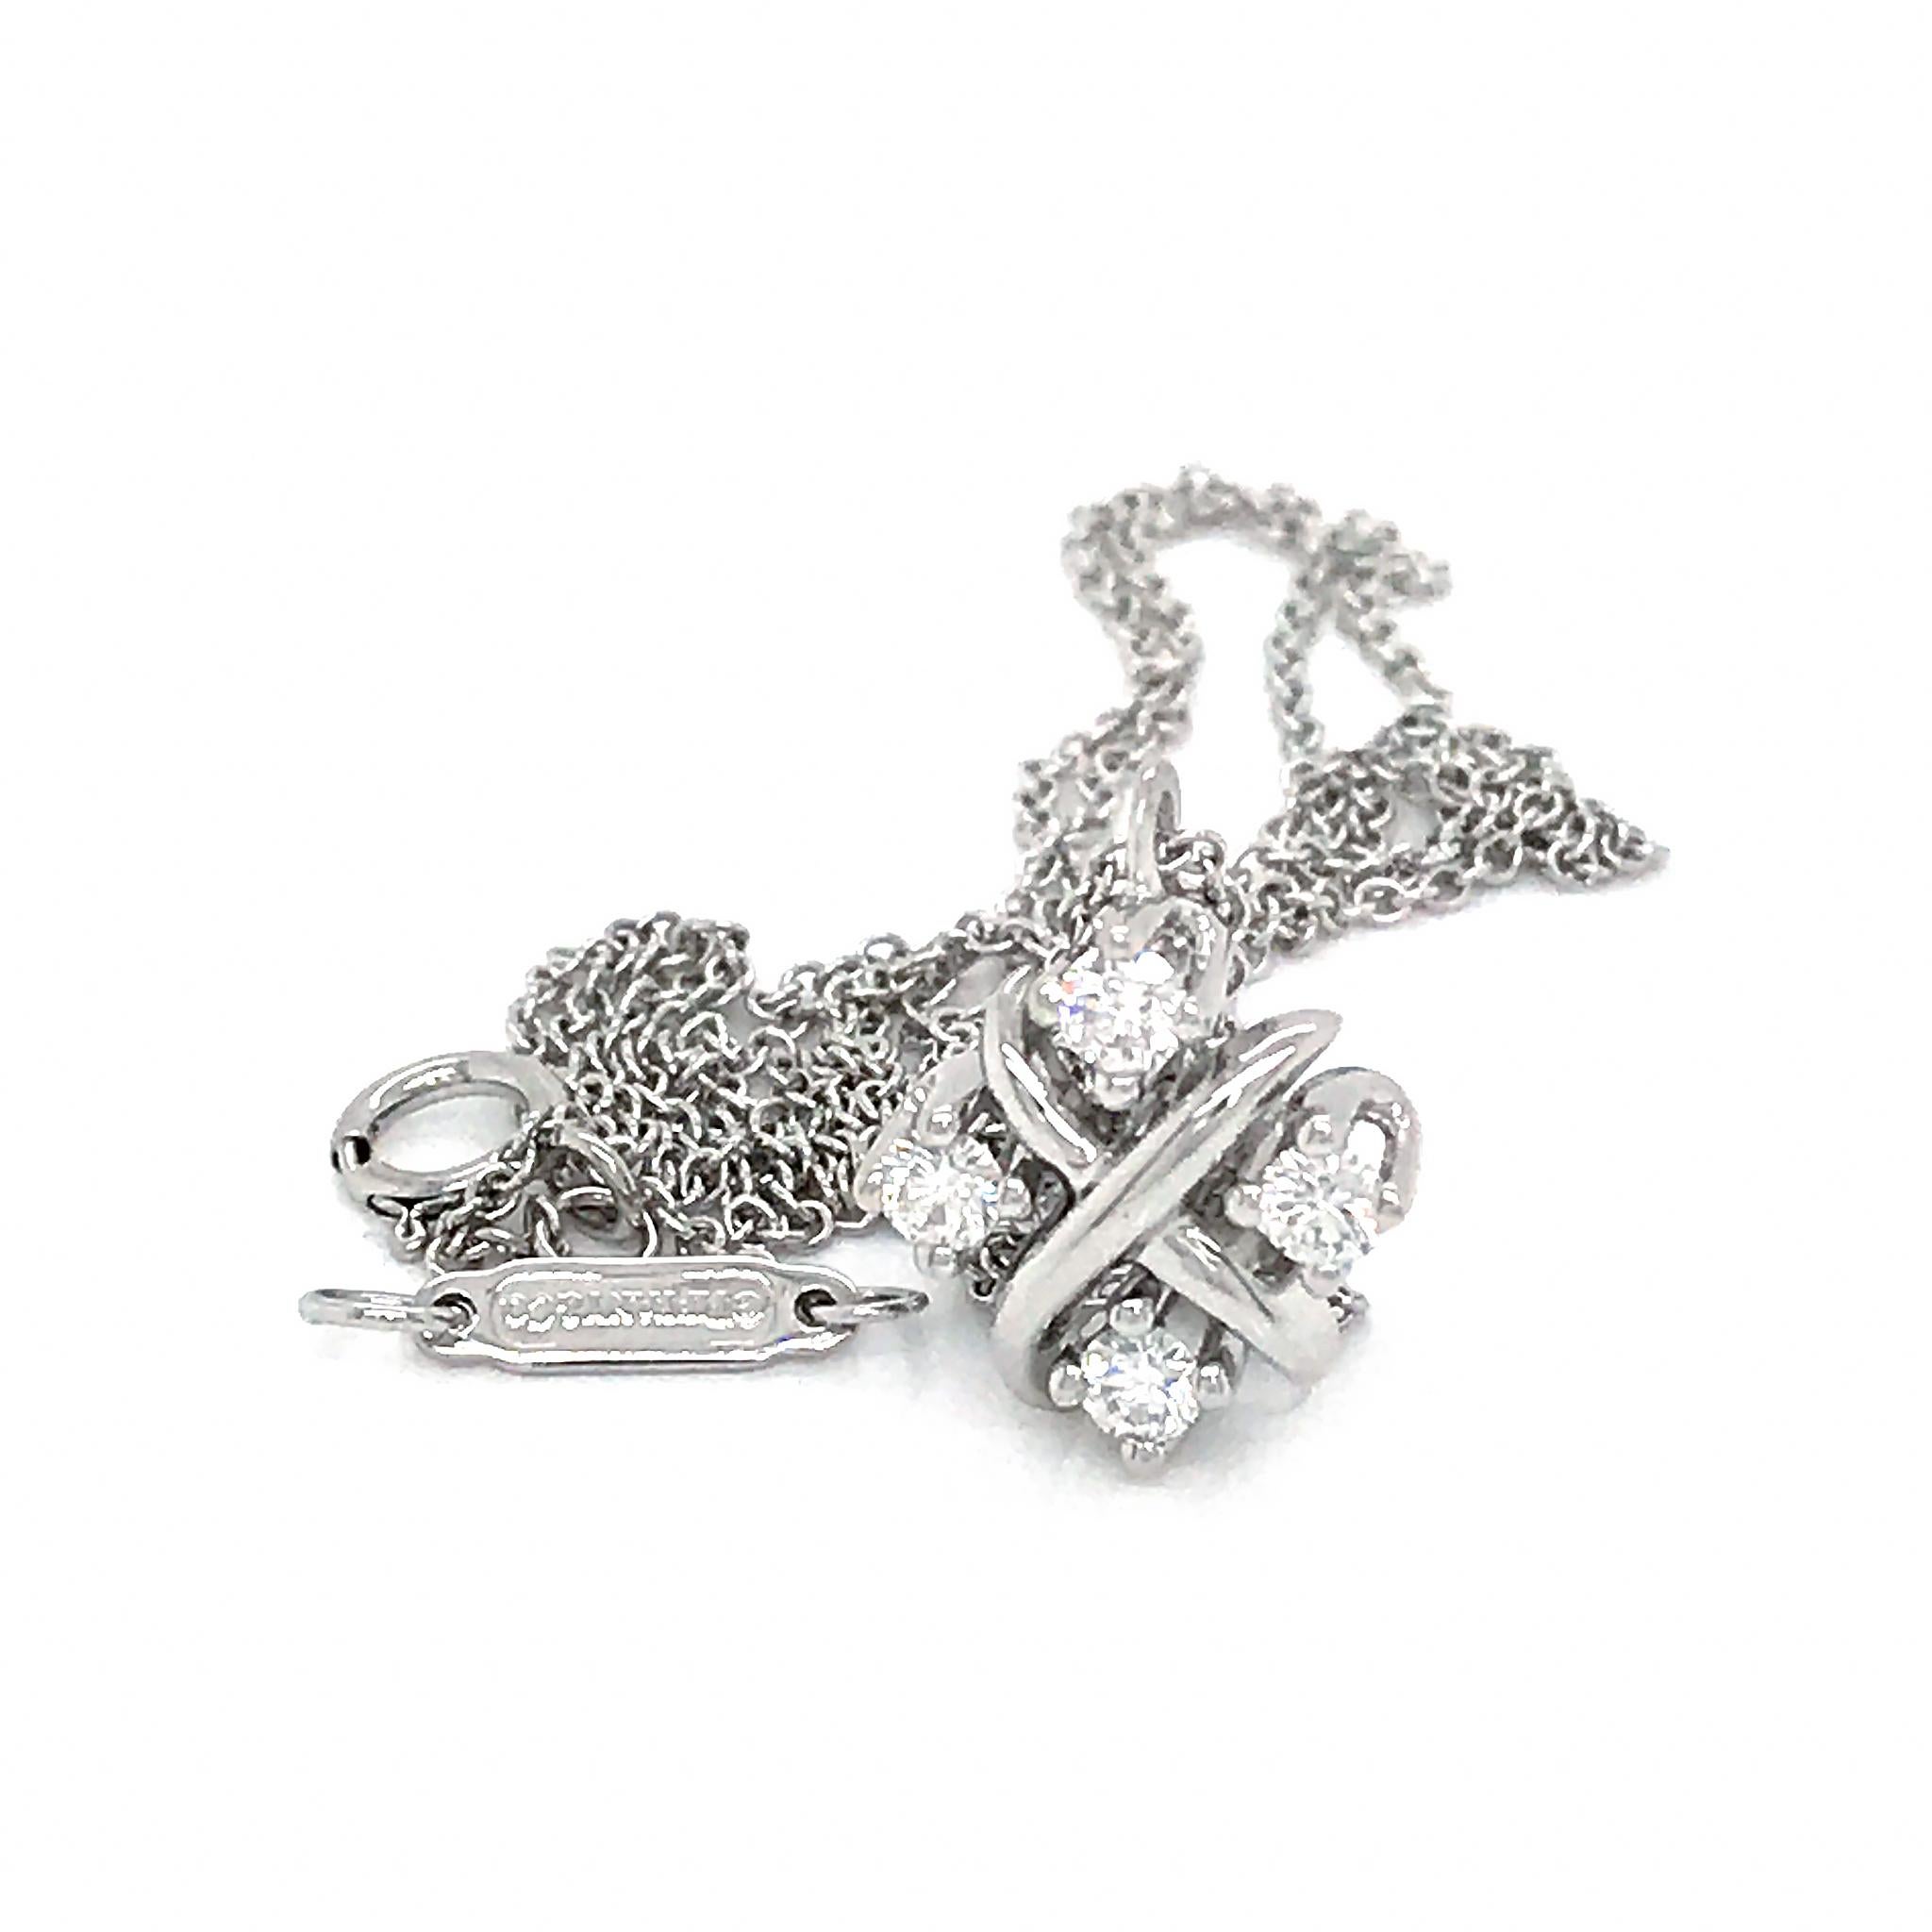 METAL TYPE: Platinum
STONE WEIGHT: 0.21ct twd
CHAIN LENGTH: 20 inches
TOTAL WEIGHT: 5.0 grams